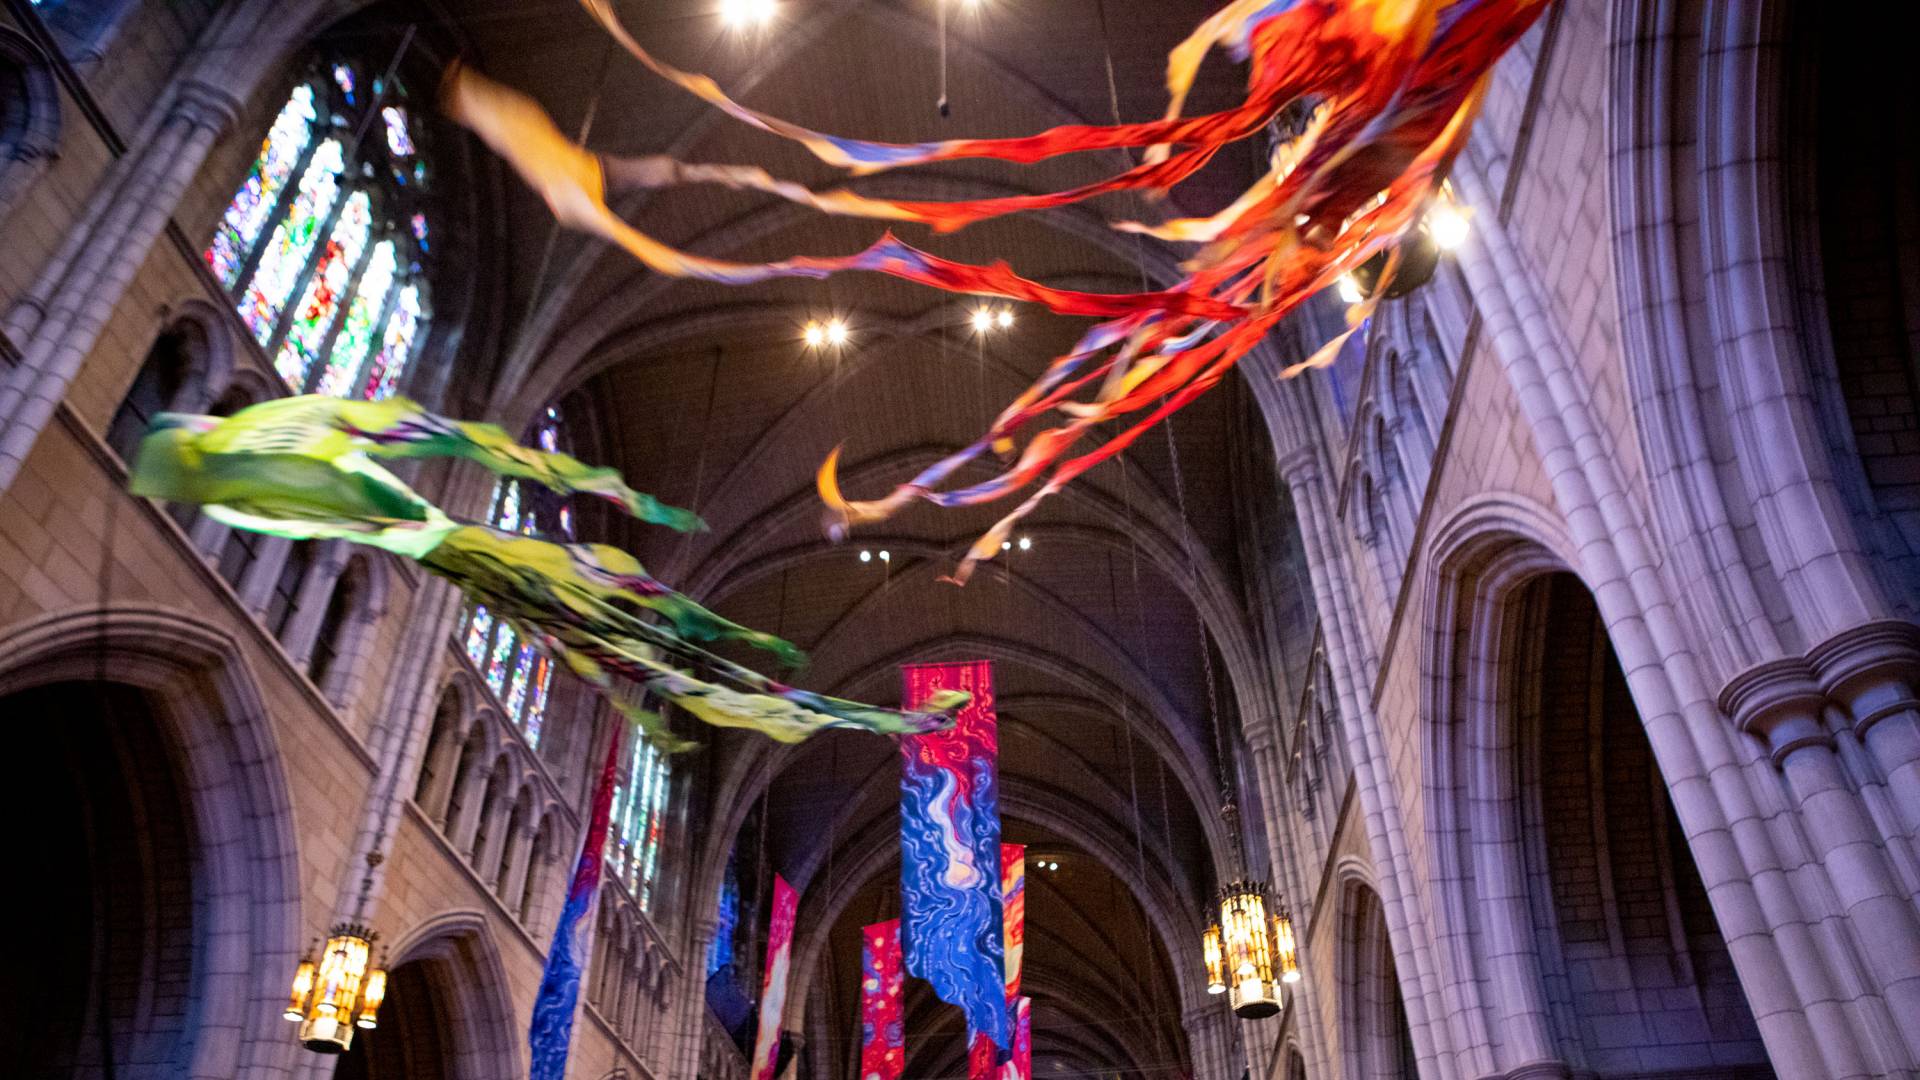 Kites fly in the University Chapel as a traditional part of Opening Exercises